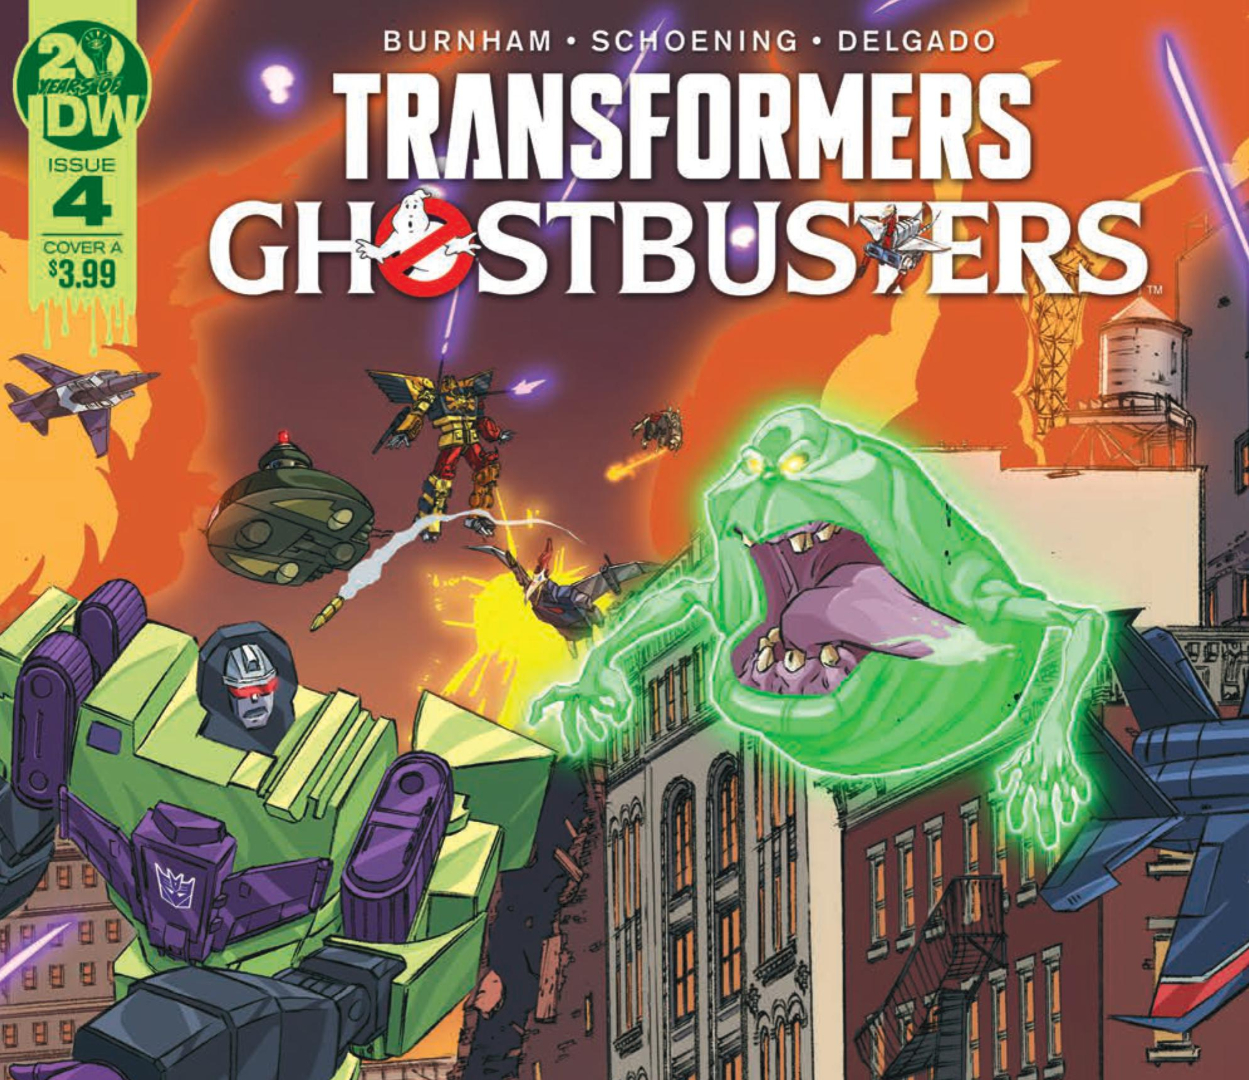 Transformers/Ghostbusters #4 review